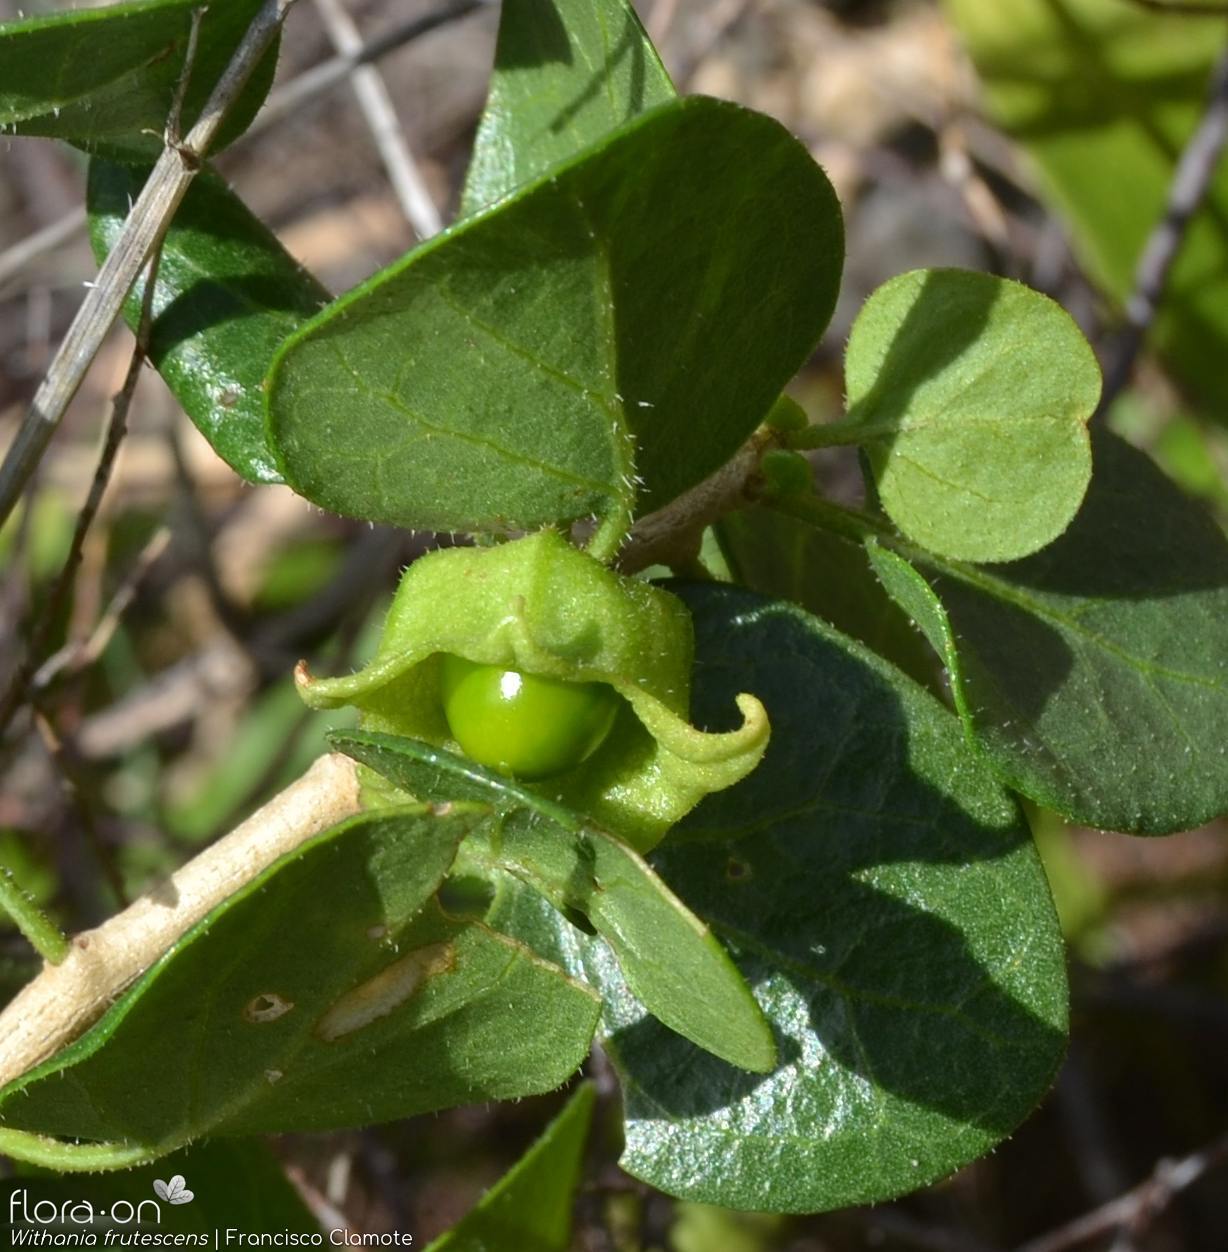 Withania frutescens - Fruto | Francisco Clamote; CC BY-NC 4.0